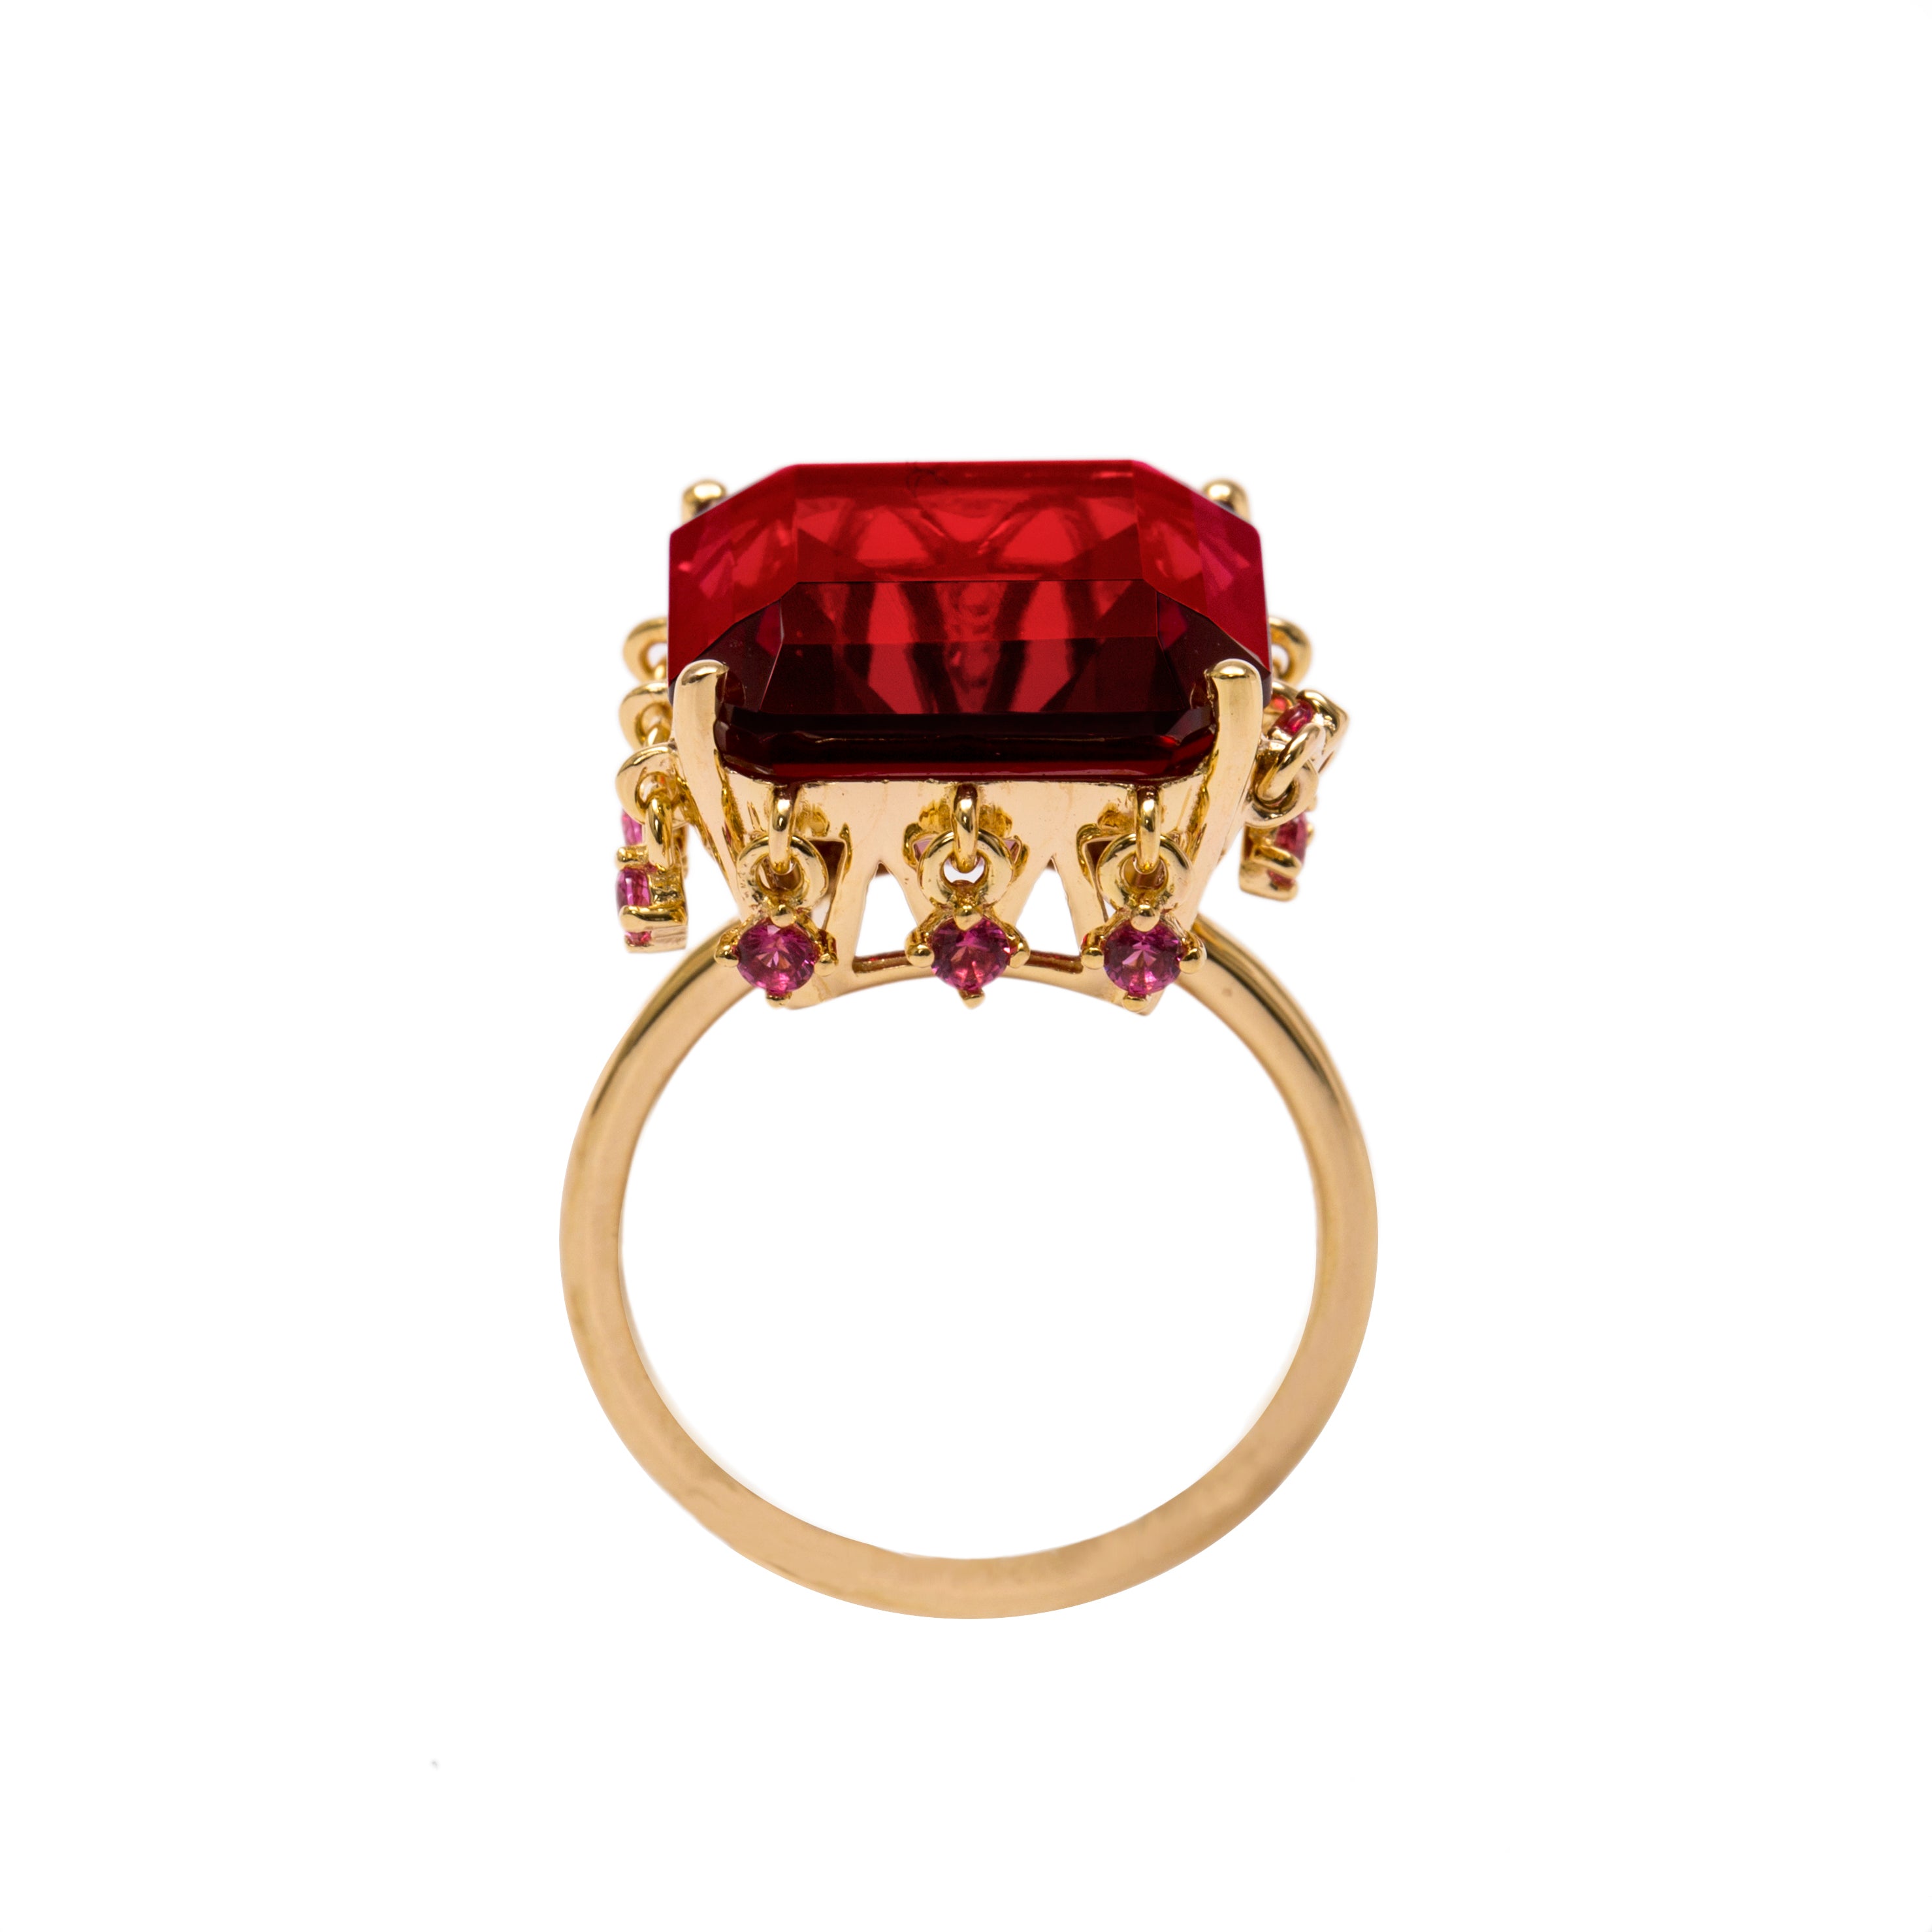 The Red Crown Vermeil Gold Ring